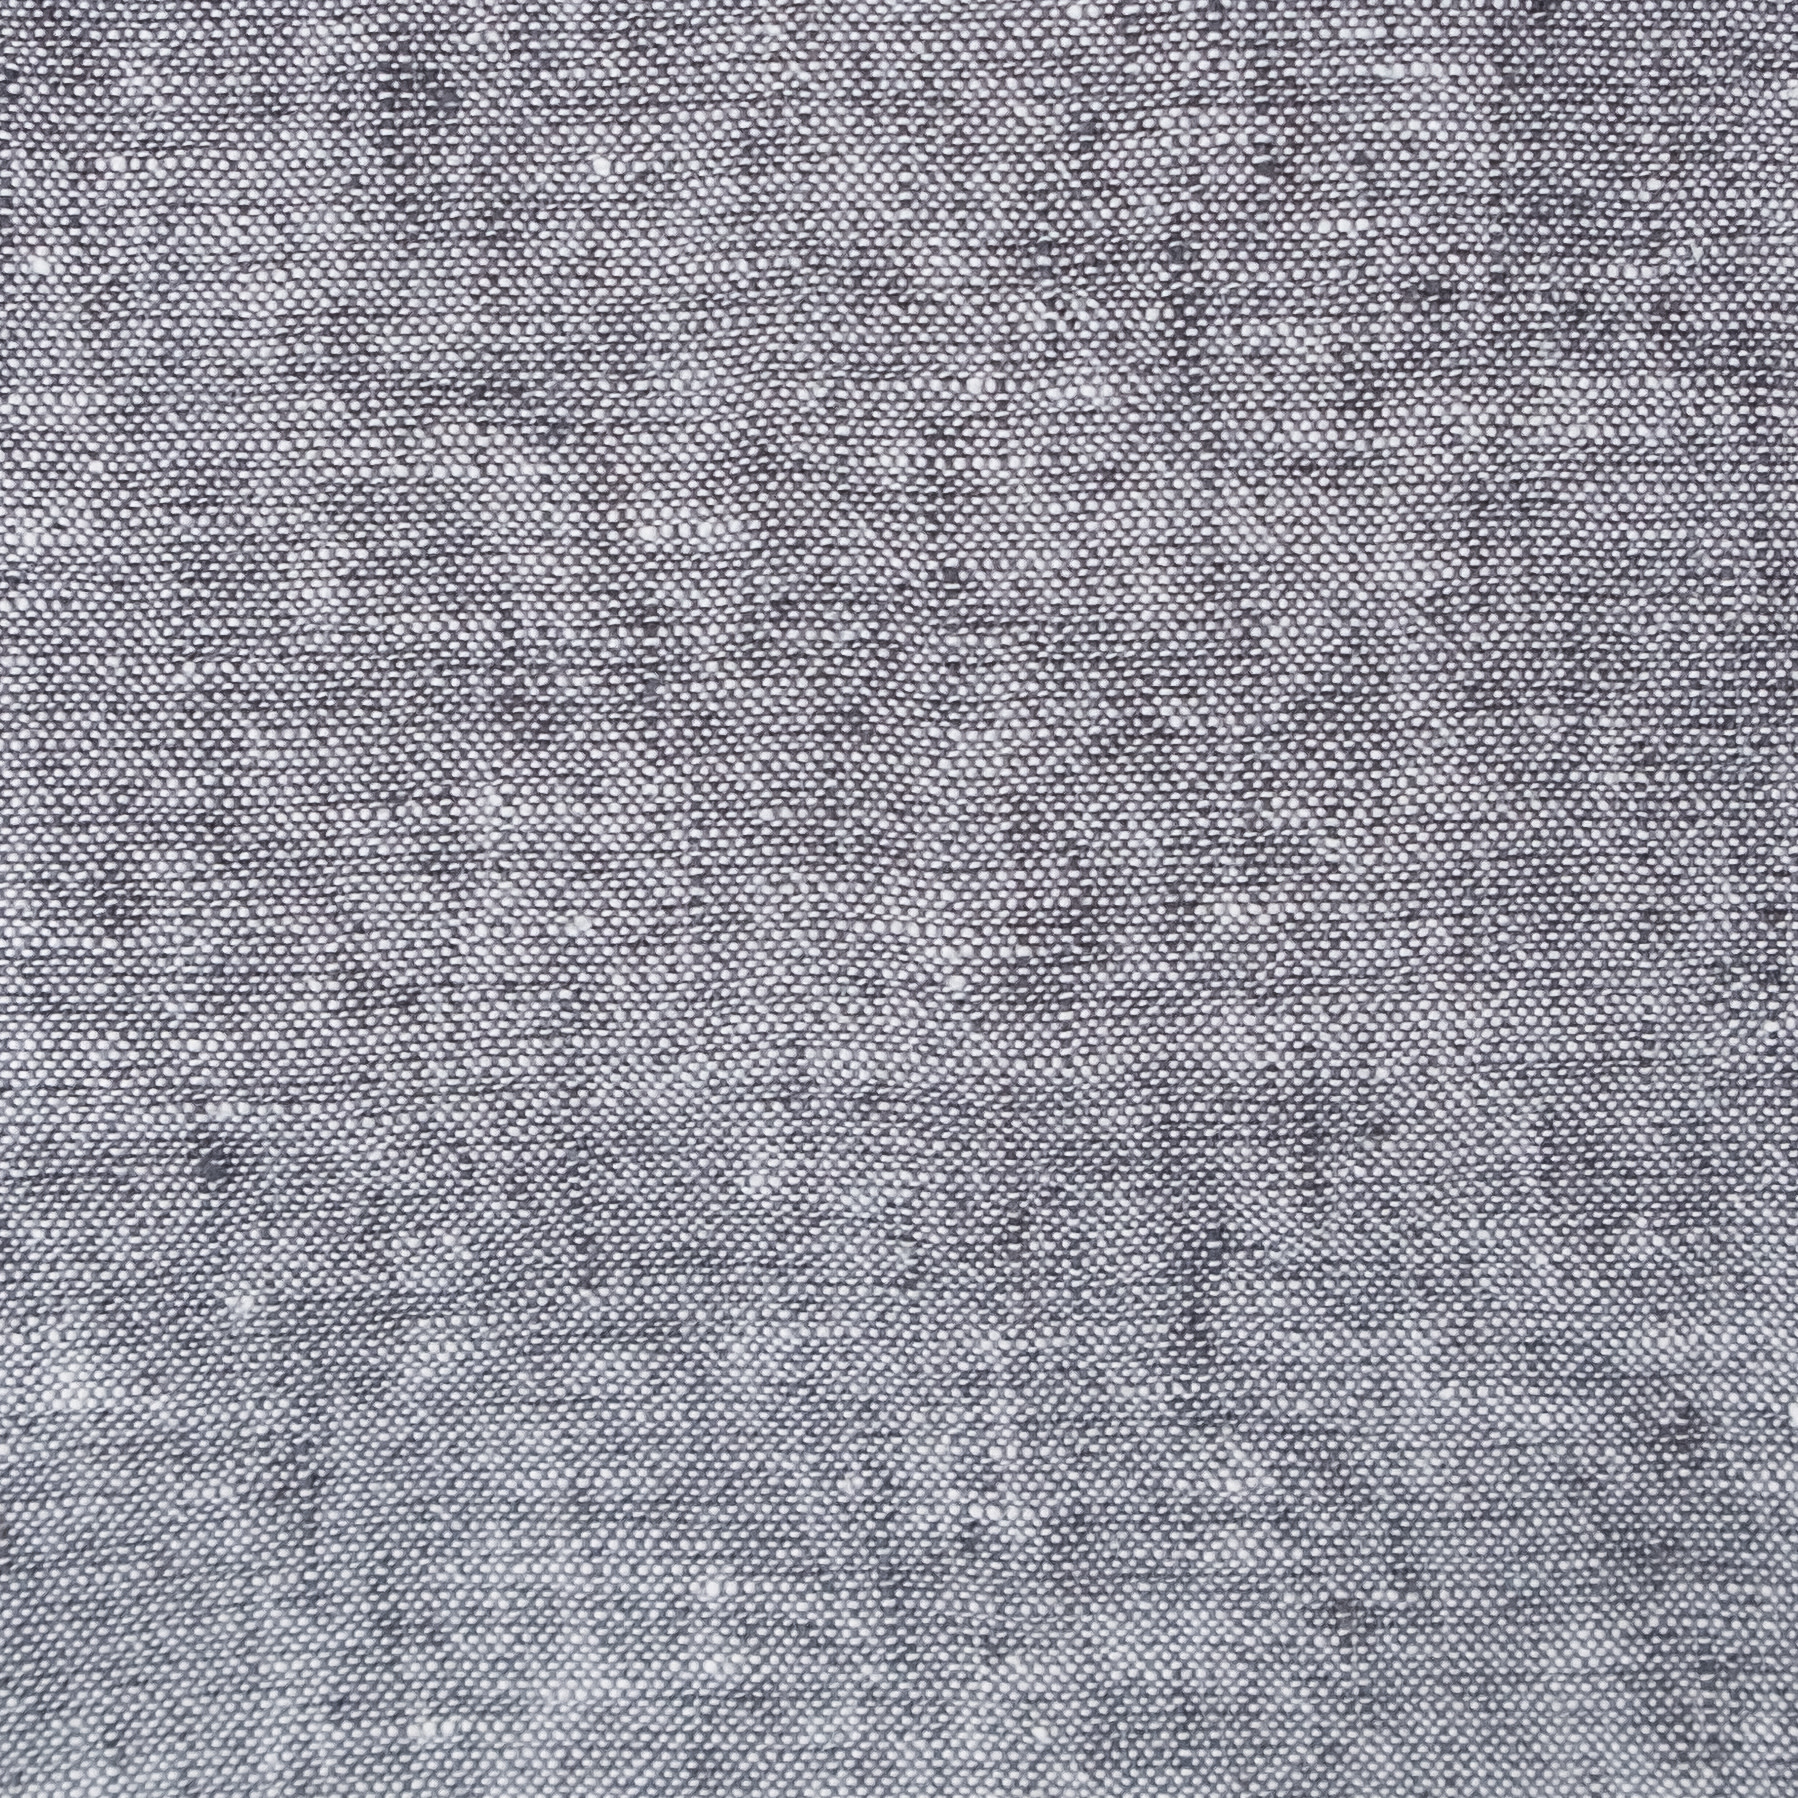 French Linen Pillow - Grey Chambray